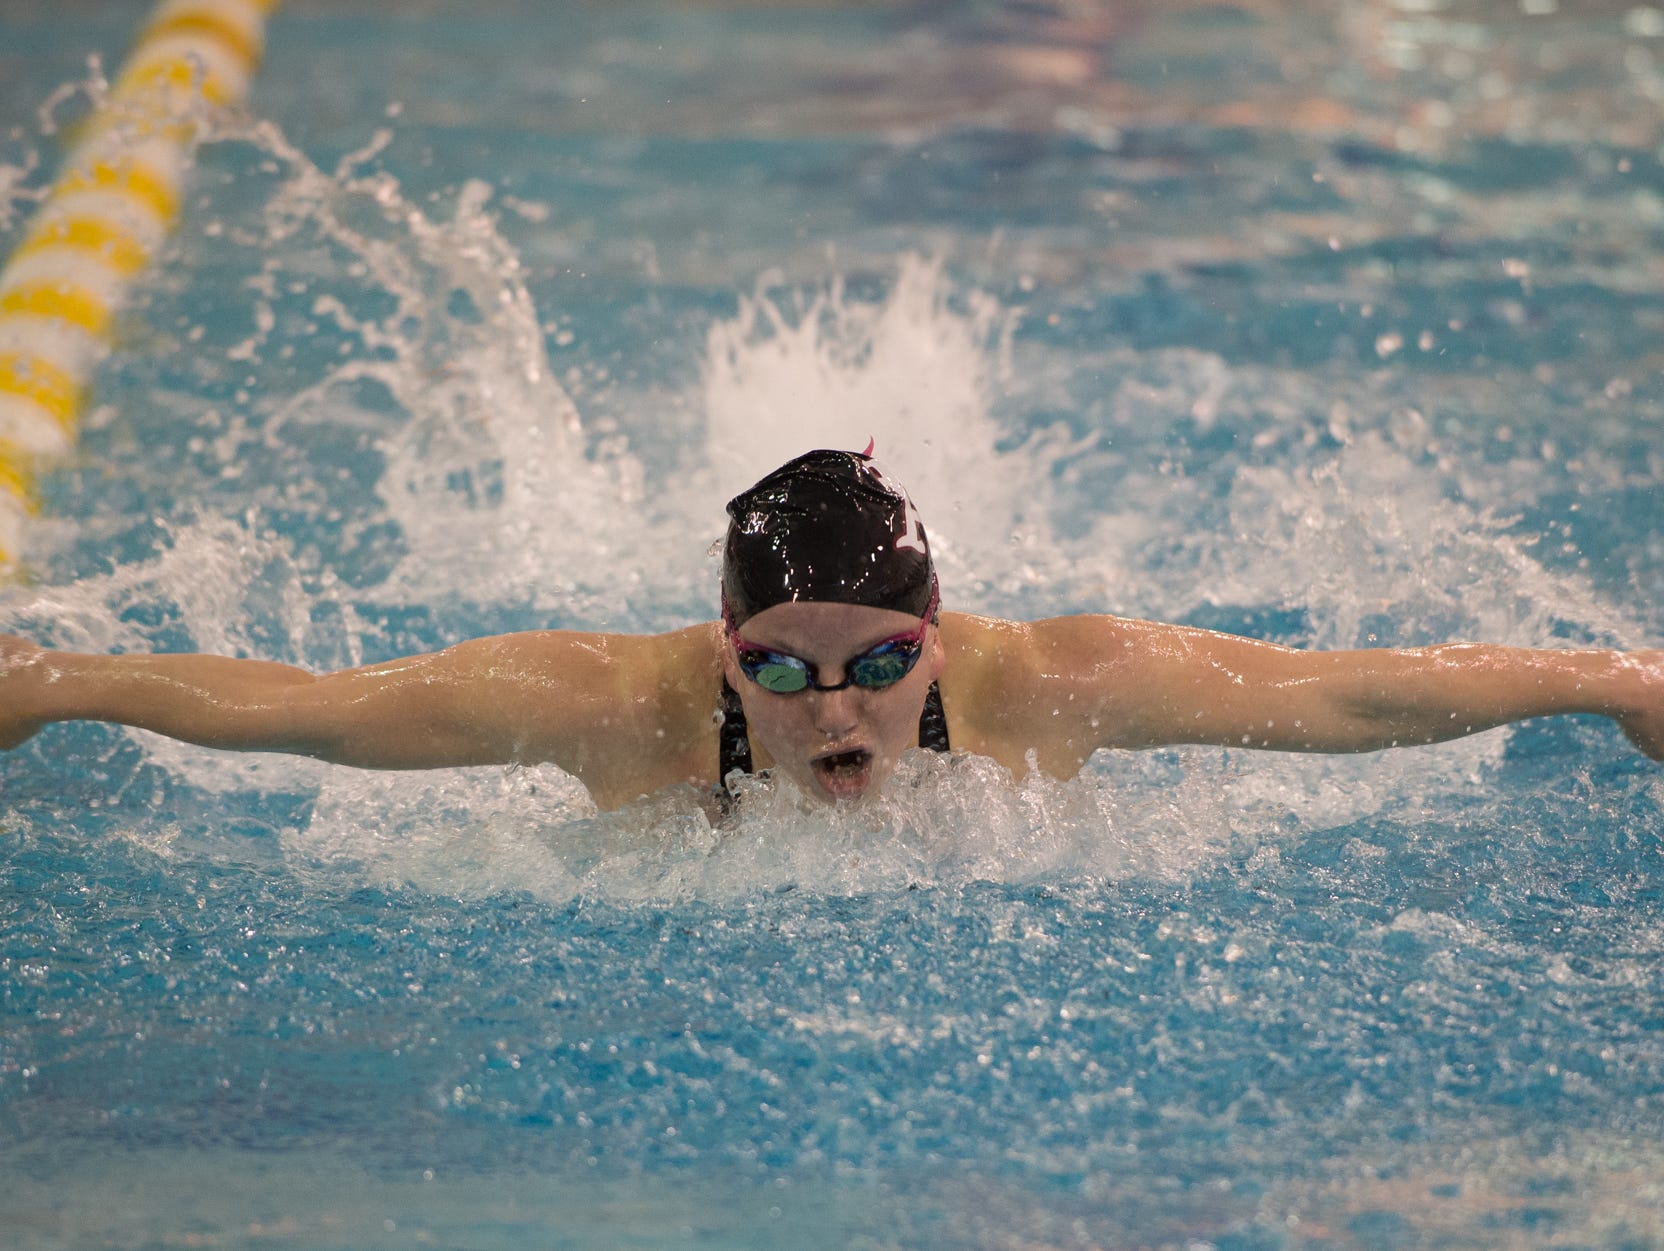 Appoquinimink's Josephine Marsh competes in the 100 yard butterfly final at the girl's DIAA swimming and diving championships at the University of Delaware.